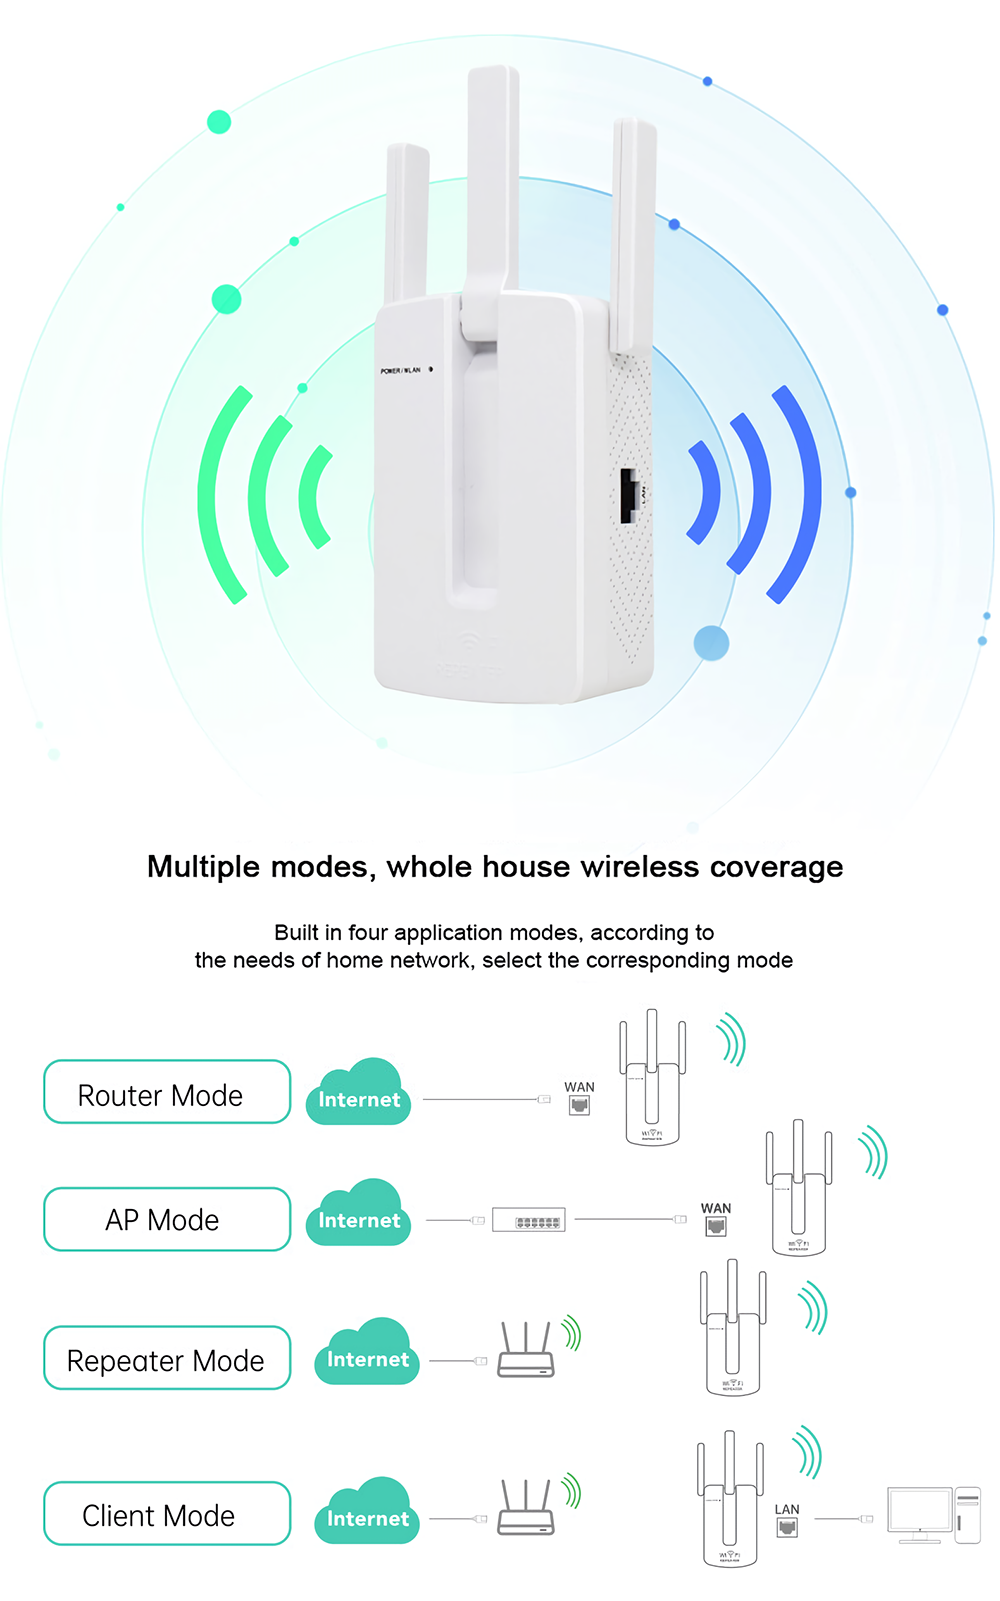 AC-1200M-Dual-Band-Wireless-AP-Repeater-WiFi-Signal-Amplifier-24GHz-5GHz-Router-Range-Extender-WiFi--1744820-2